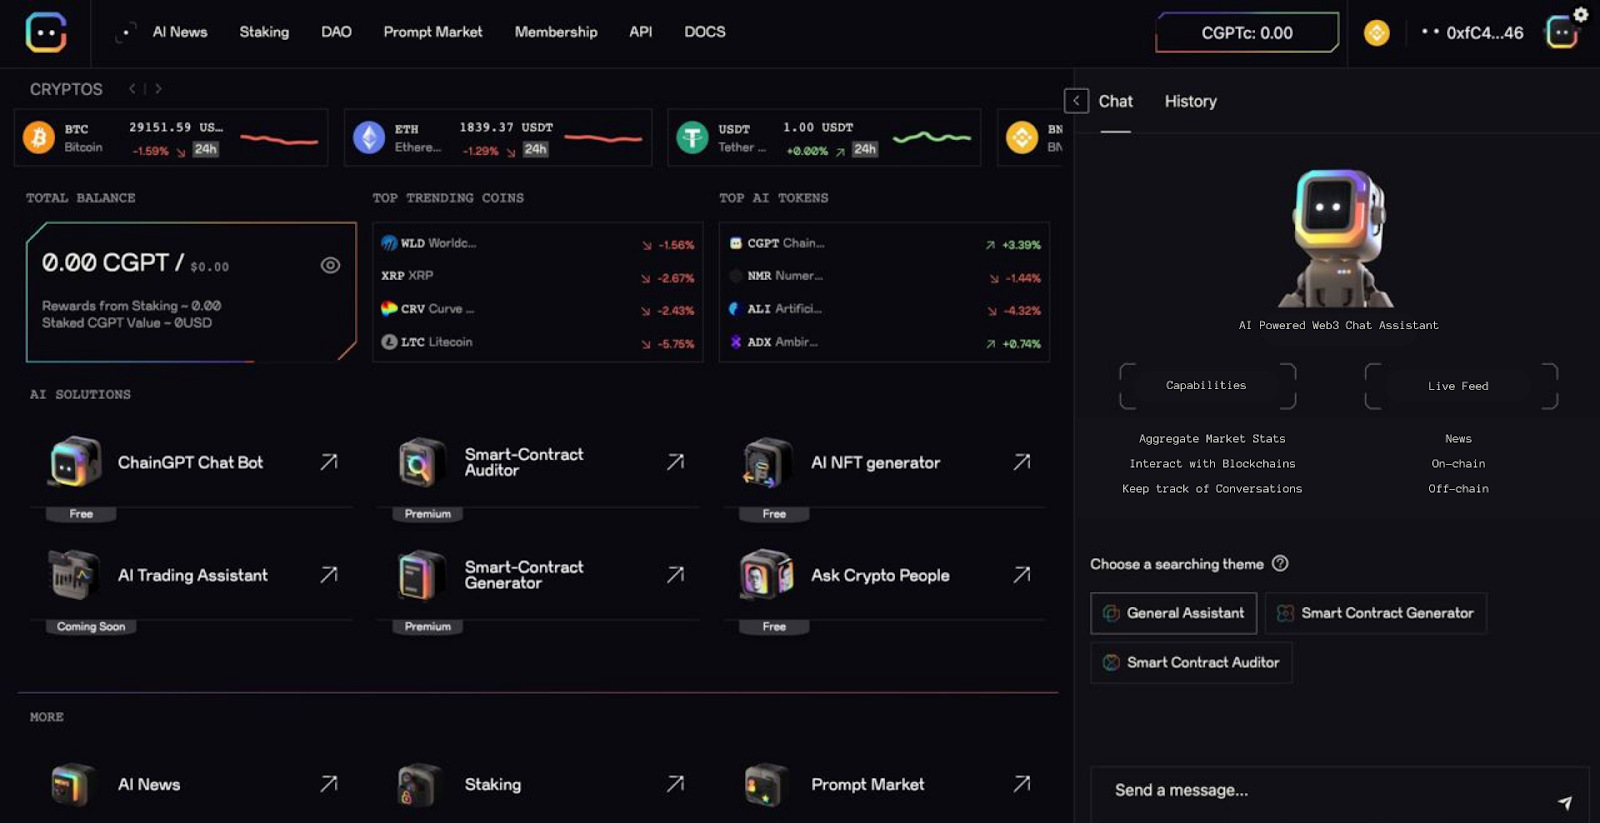 ChainGPT V1 Web App and DApp Screenshot,  a leading AI platform specialized in blockchain, Web3, and crypto tools, featuring services like AI-powered NFT creation, smart contract auditing, smart contract generation, and AI-driven trading tools.